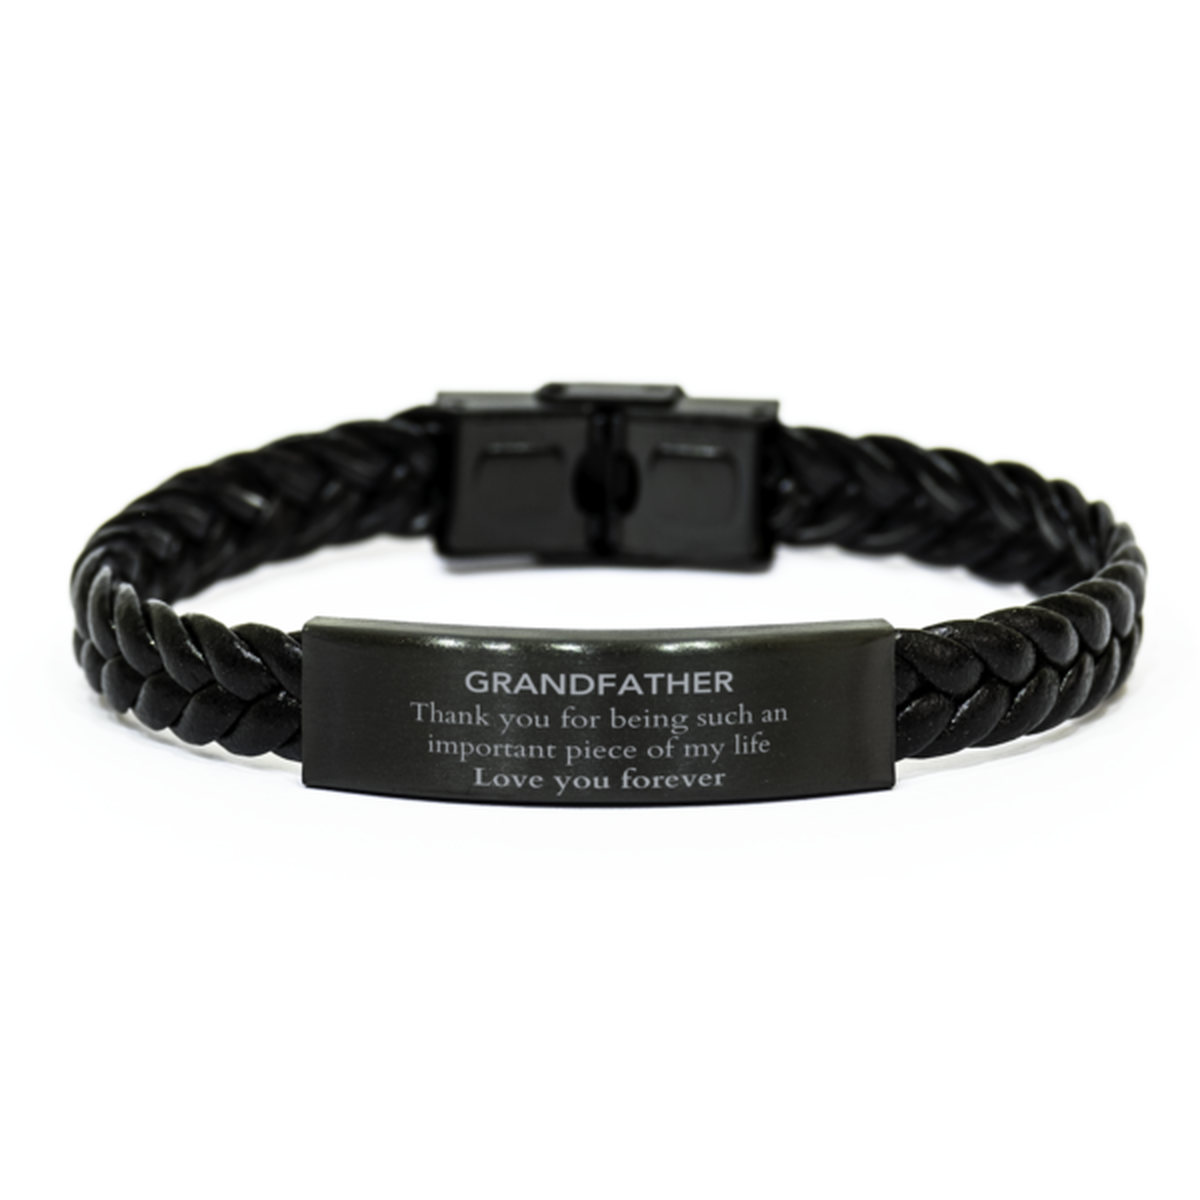 Appropriate Grandfather Braided Leather Bracelet Epic Birthday Gifts for Grandfather Thank you for being such an important piece of my life Grandfather Christmas Mothers Fathers Day